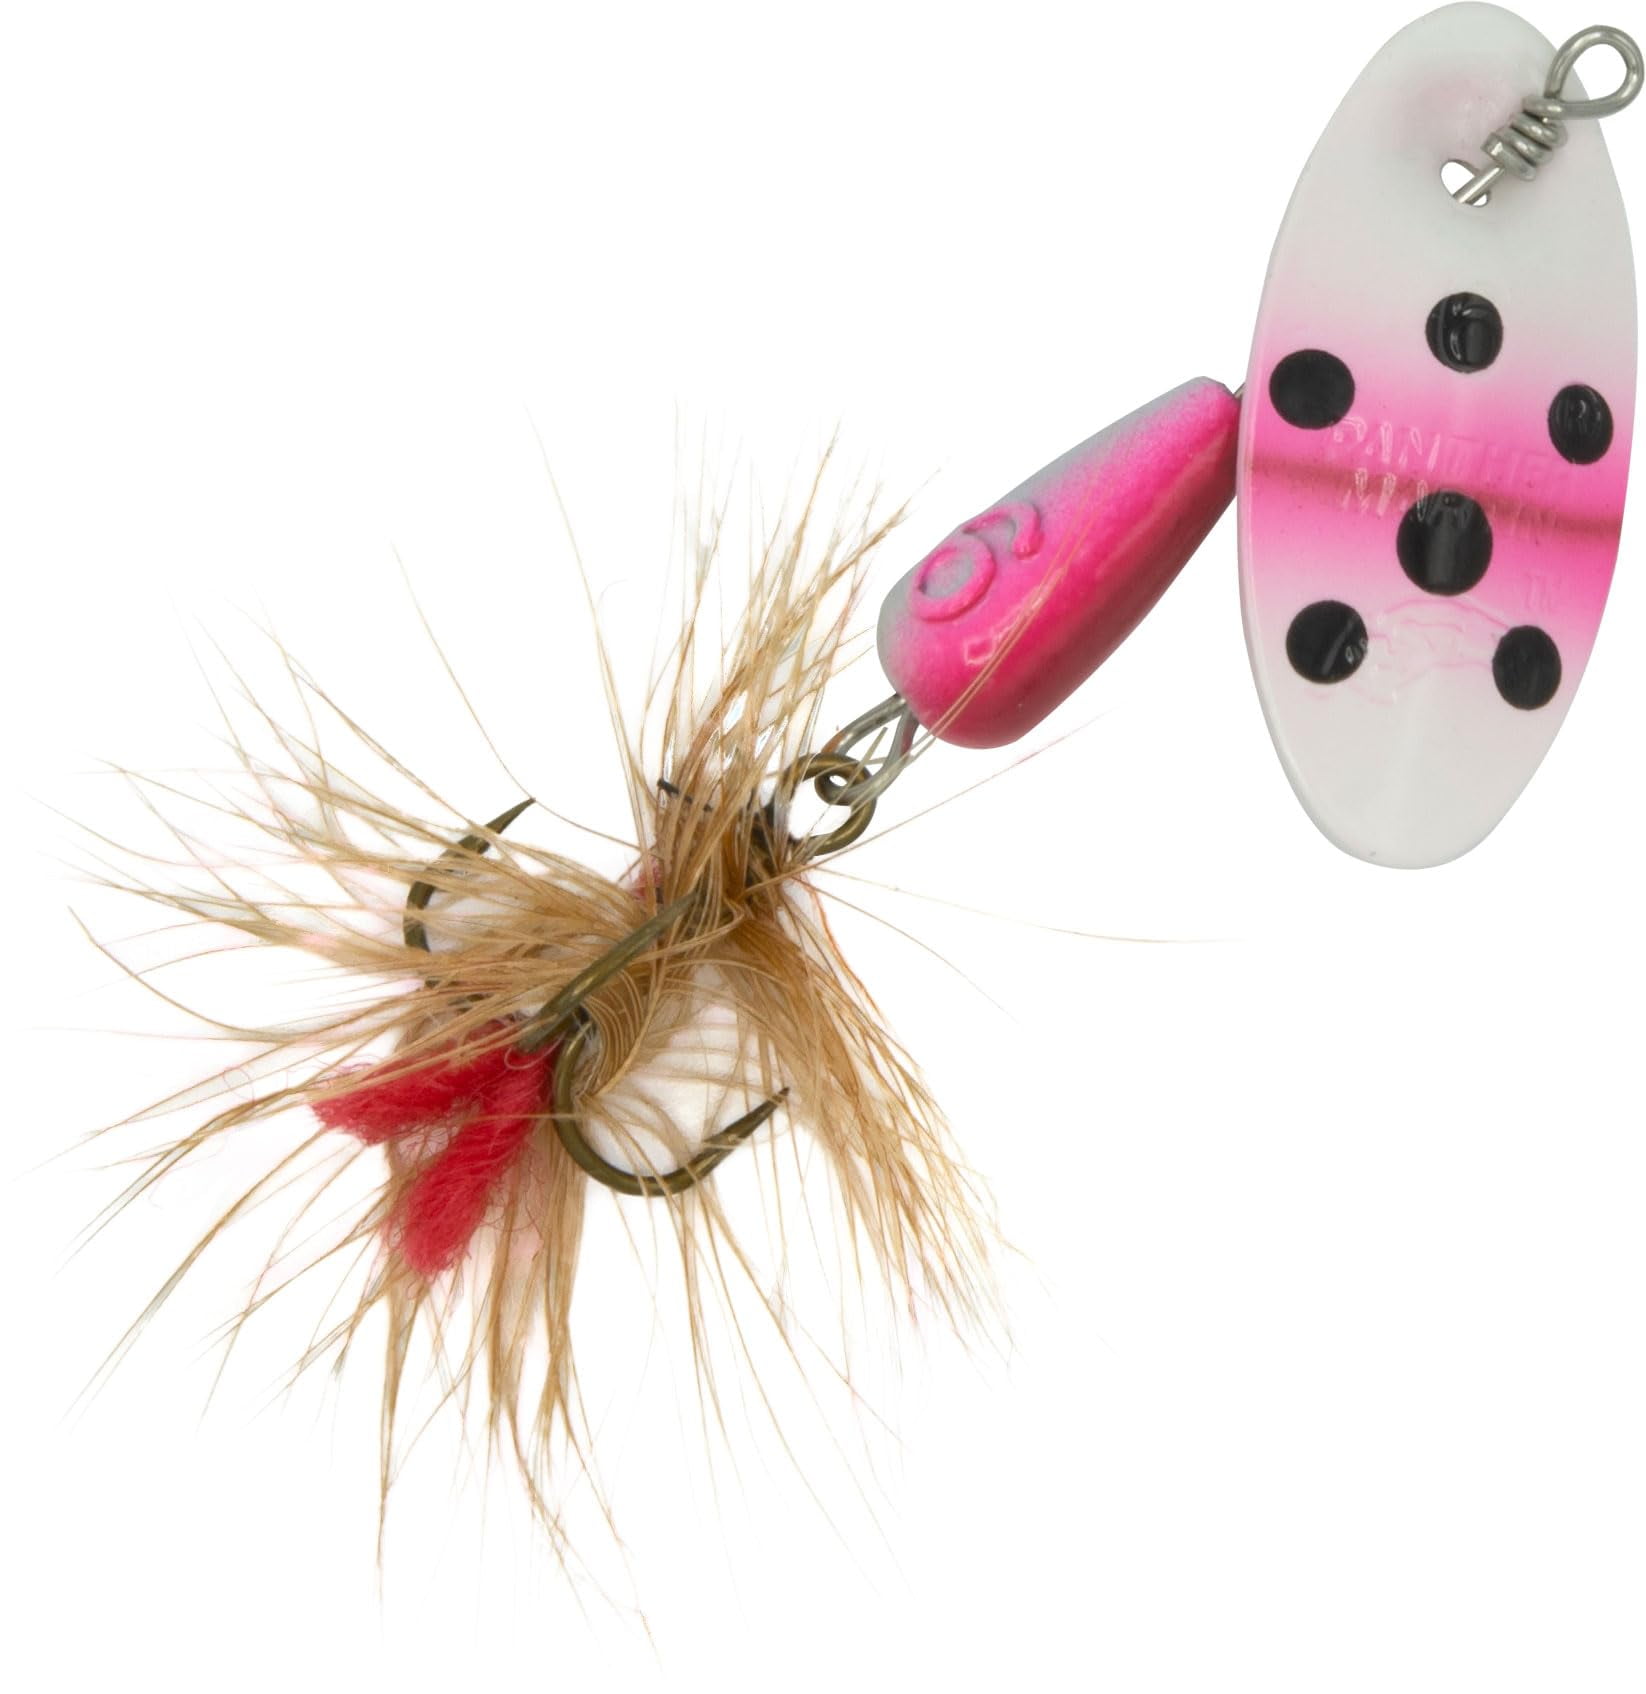 Panther Martin Salmon Steelhead UV Spinner Trout, Spinners & Spinnerbaits -   Canada